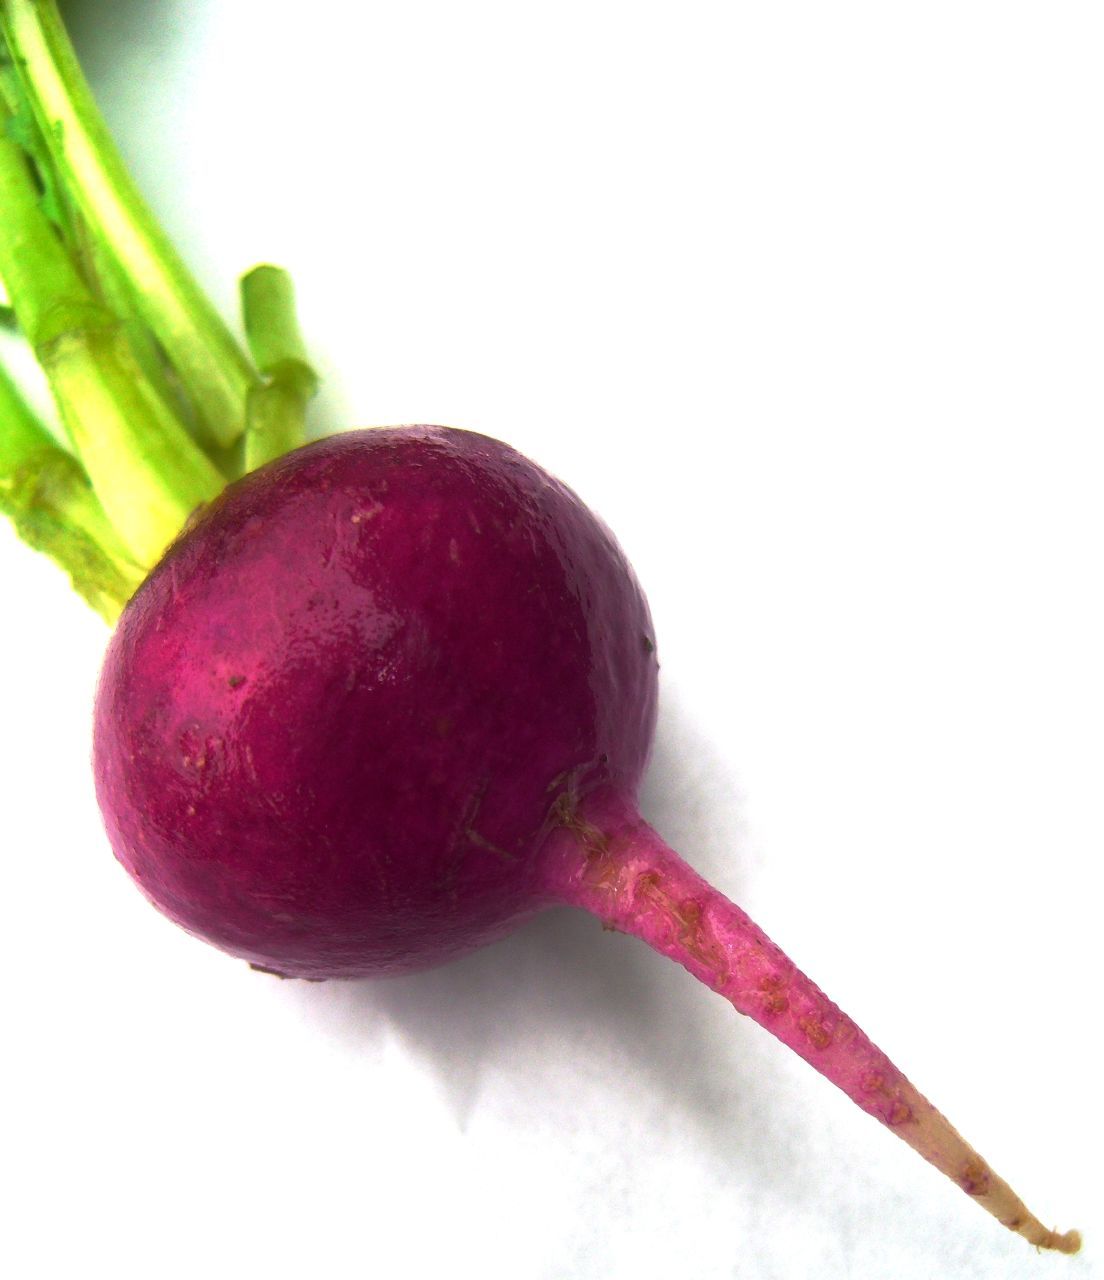 Beet HD Wallpapers and Backgrounds